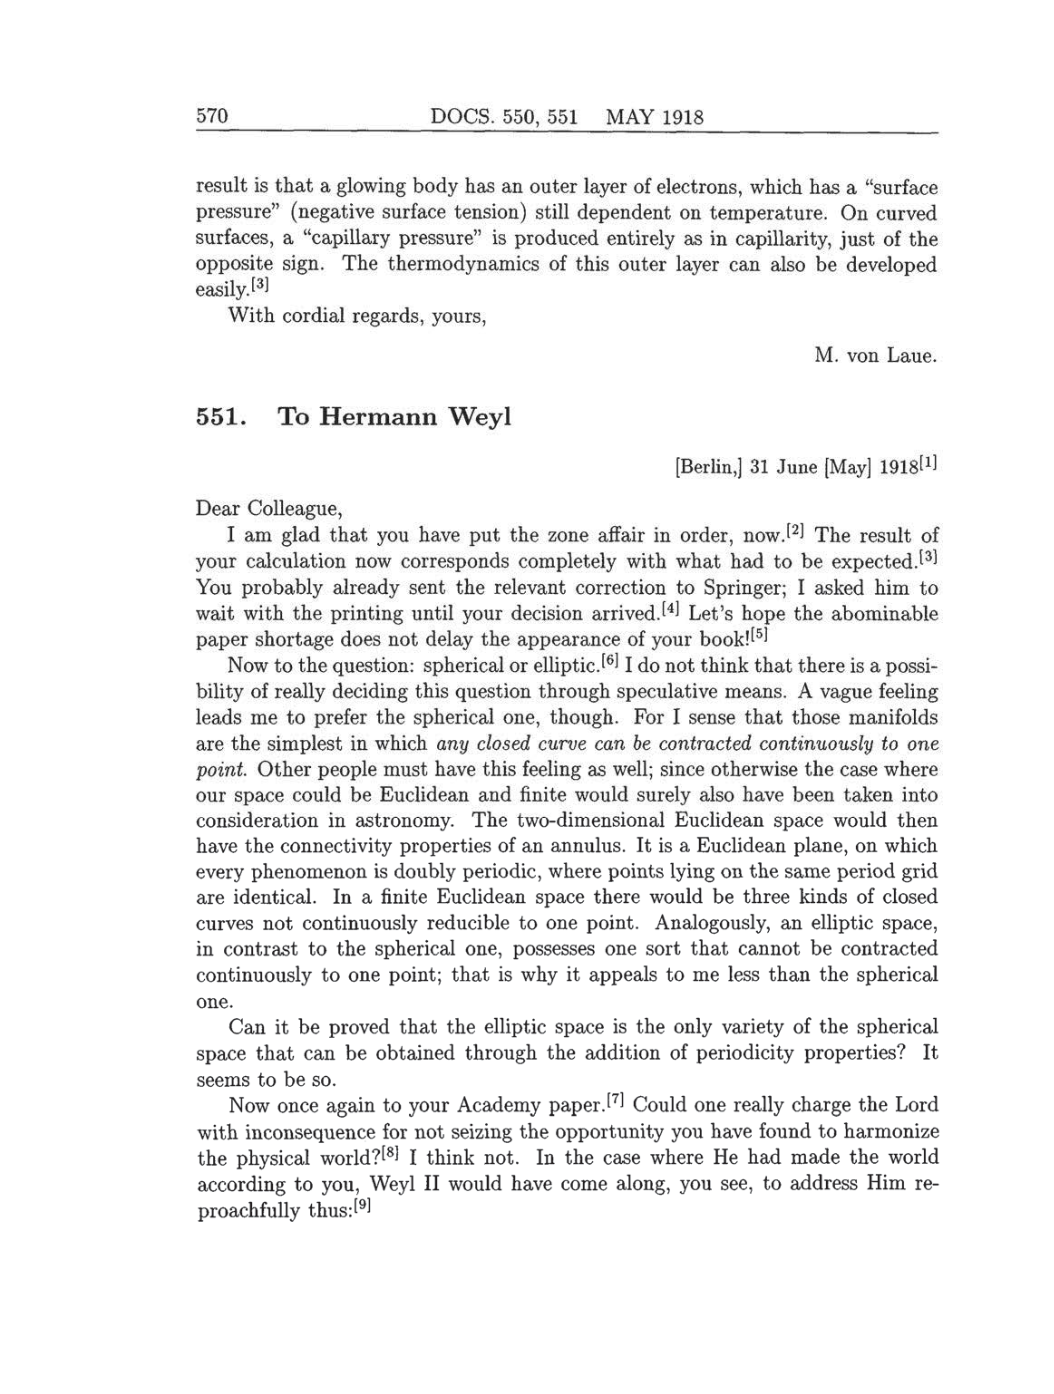 Volume 8: The Berlin Years: Correspondence, 1914-1918 (English translation supplement) page 570